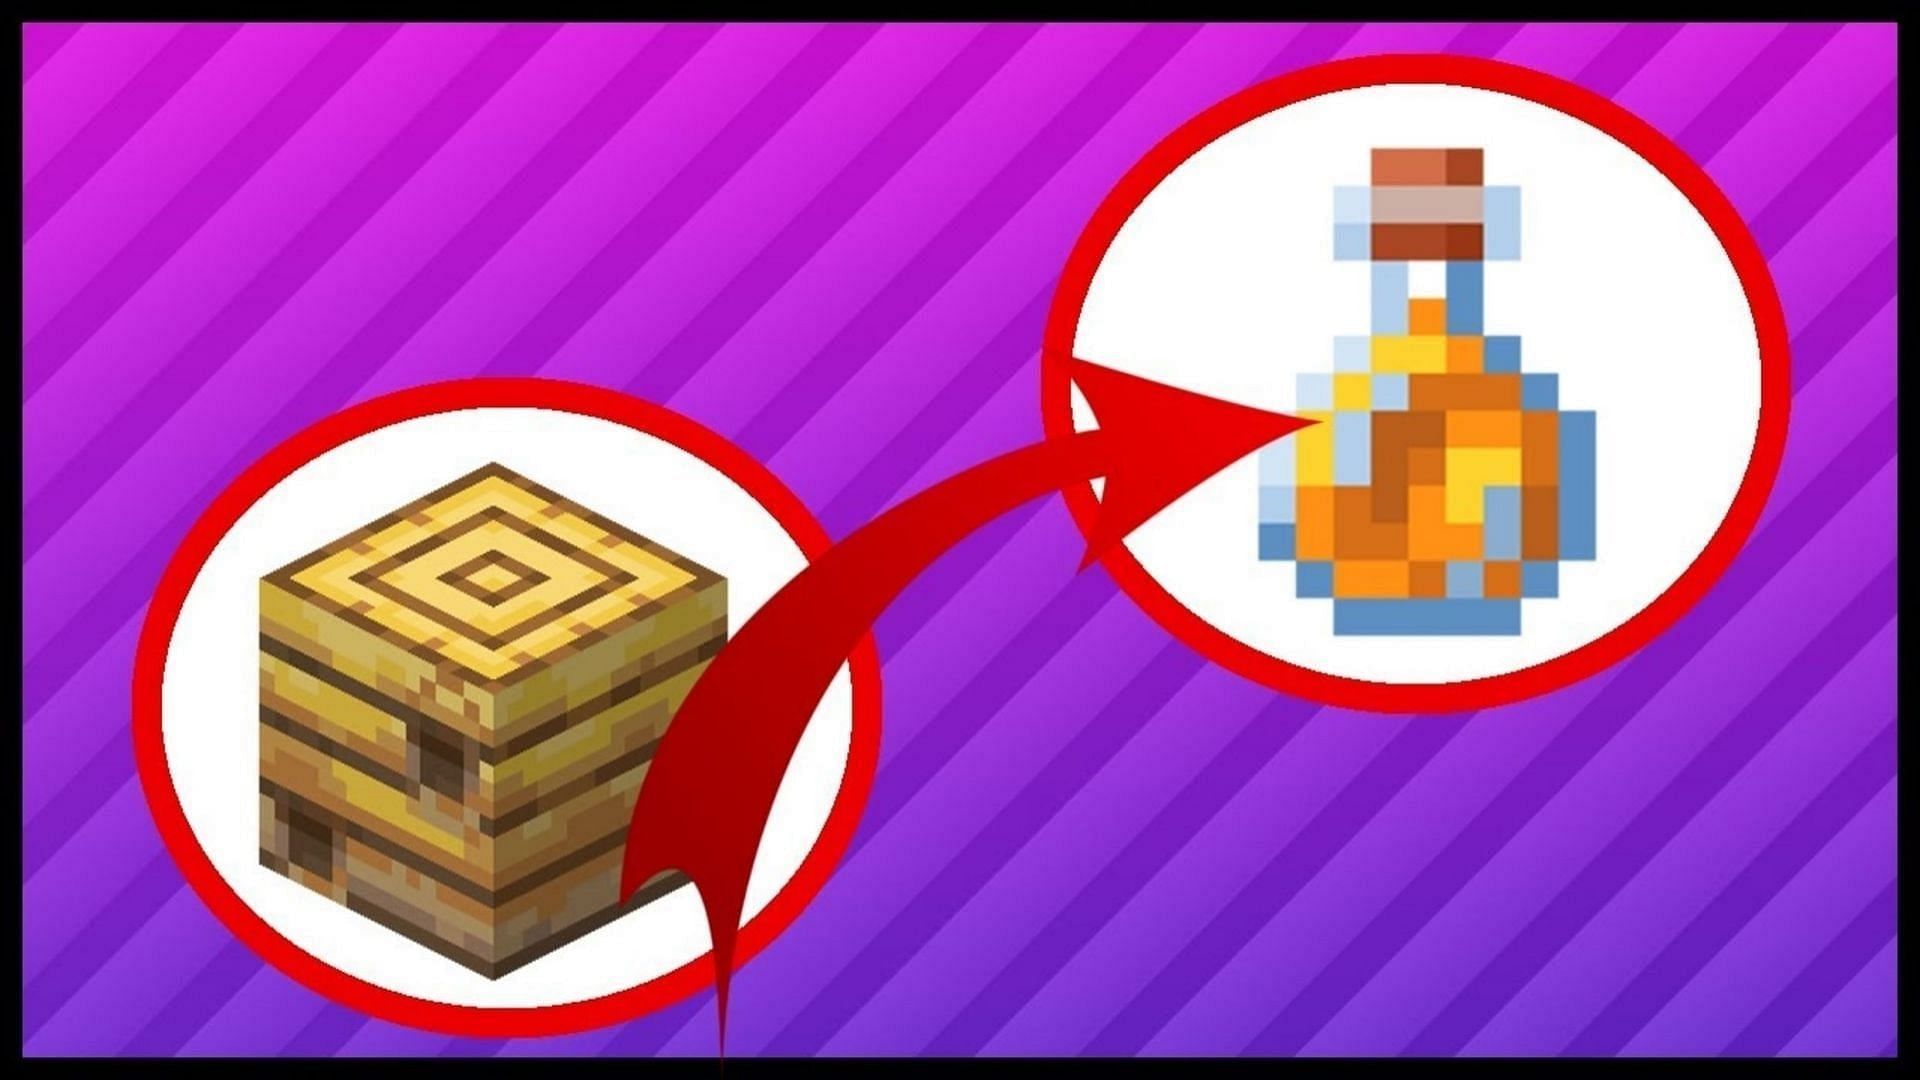 Bottled honey can be obtained from beehives and nests in Minecraft (Image via Rajcraft/YouTube)